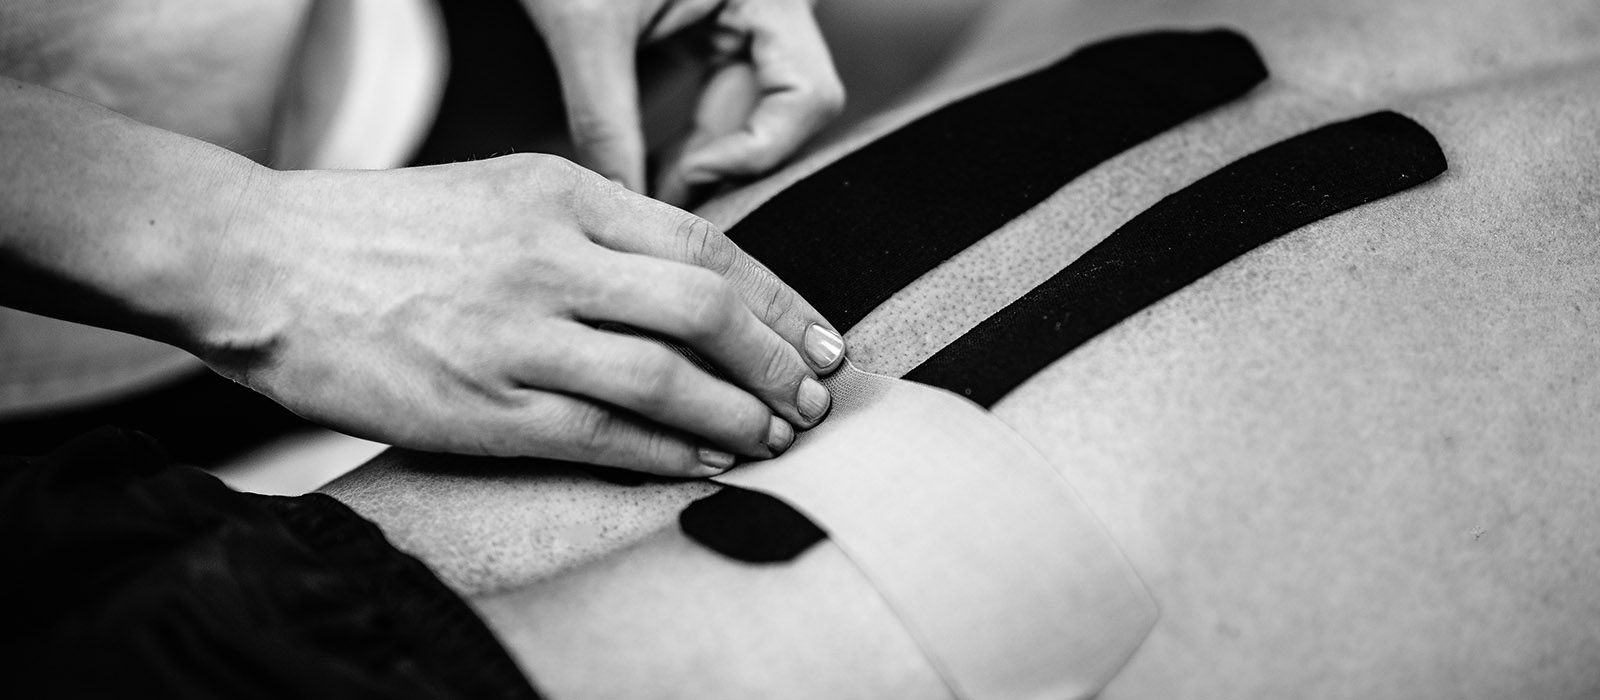 Physical therapist applying kinesio taping